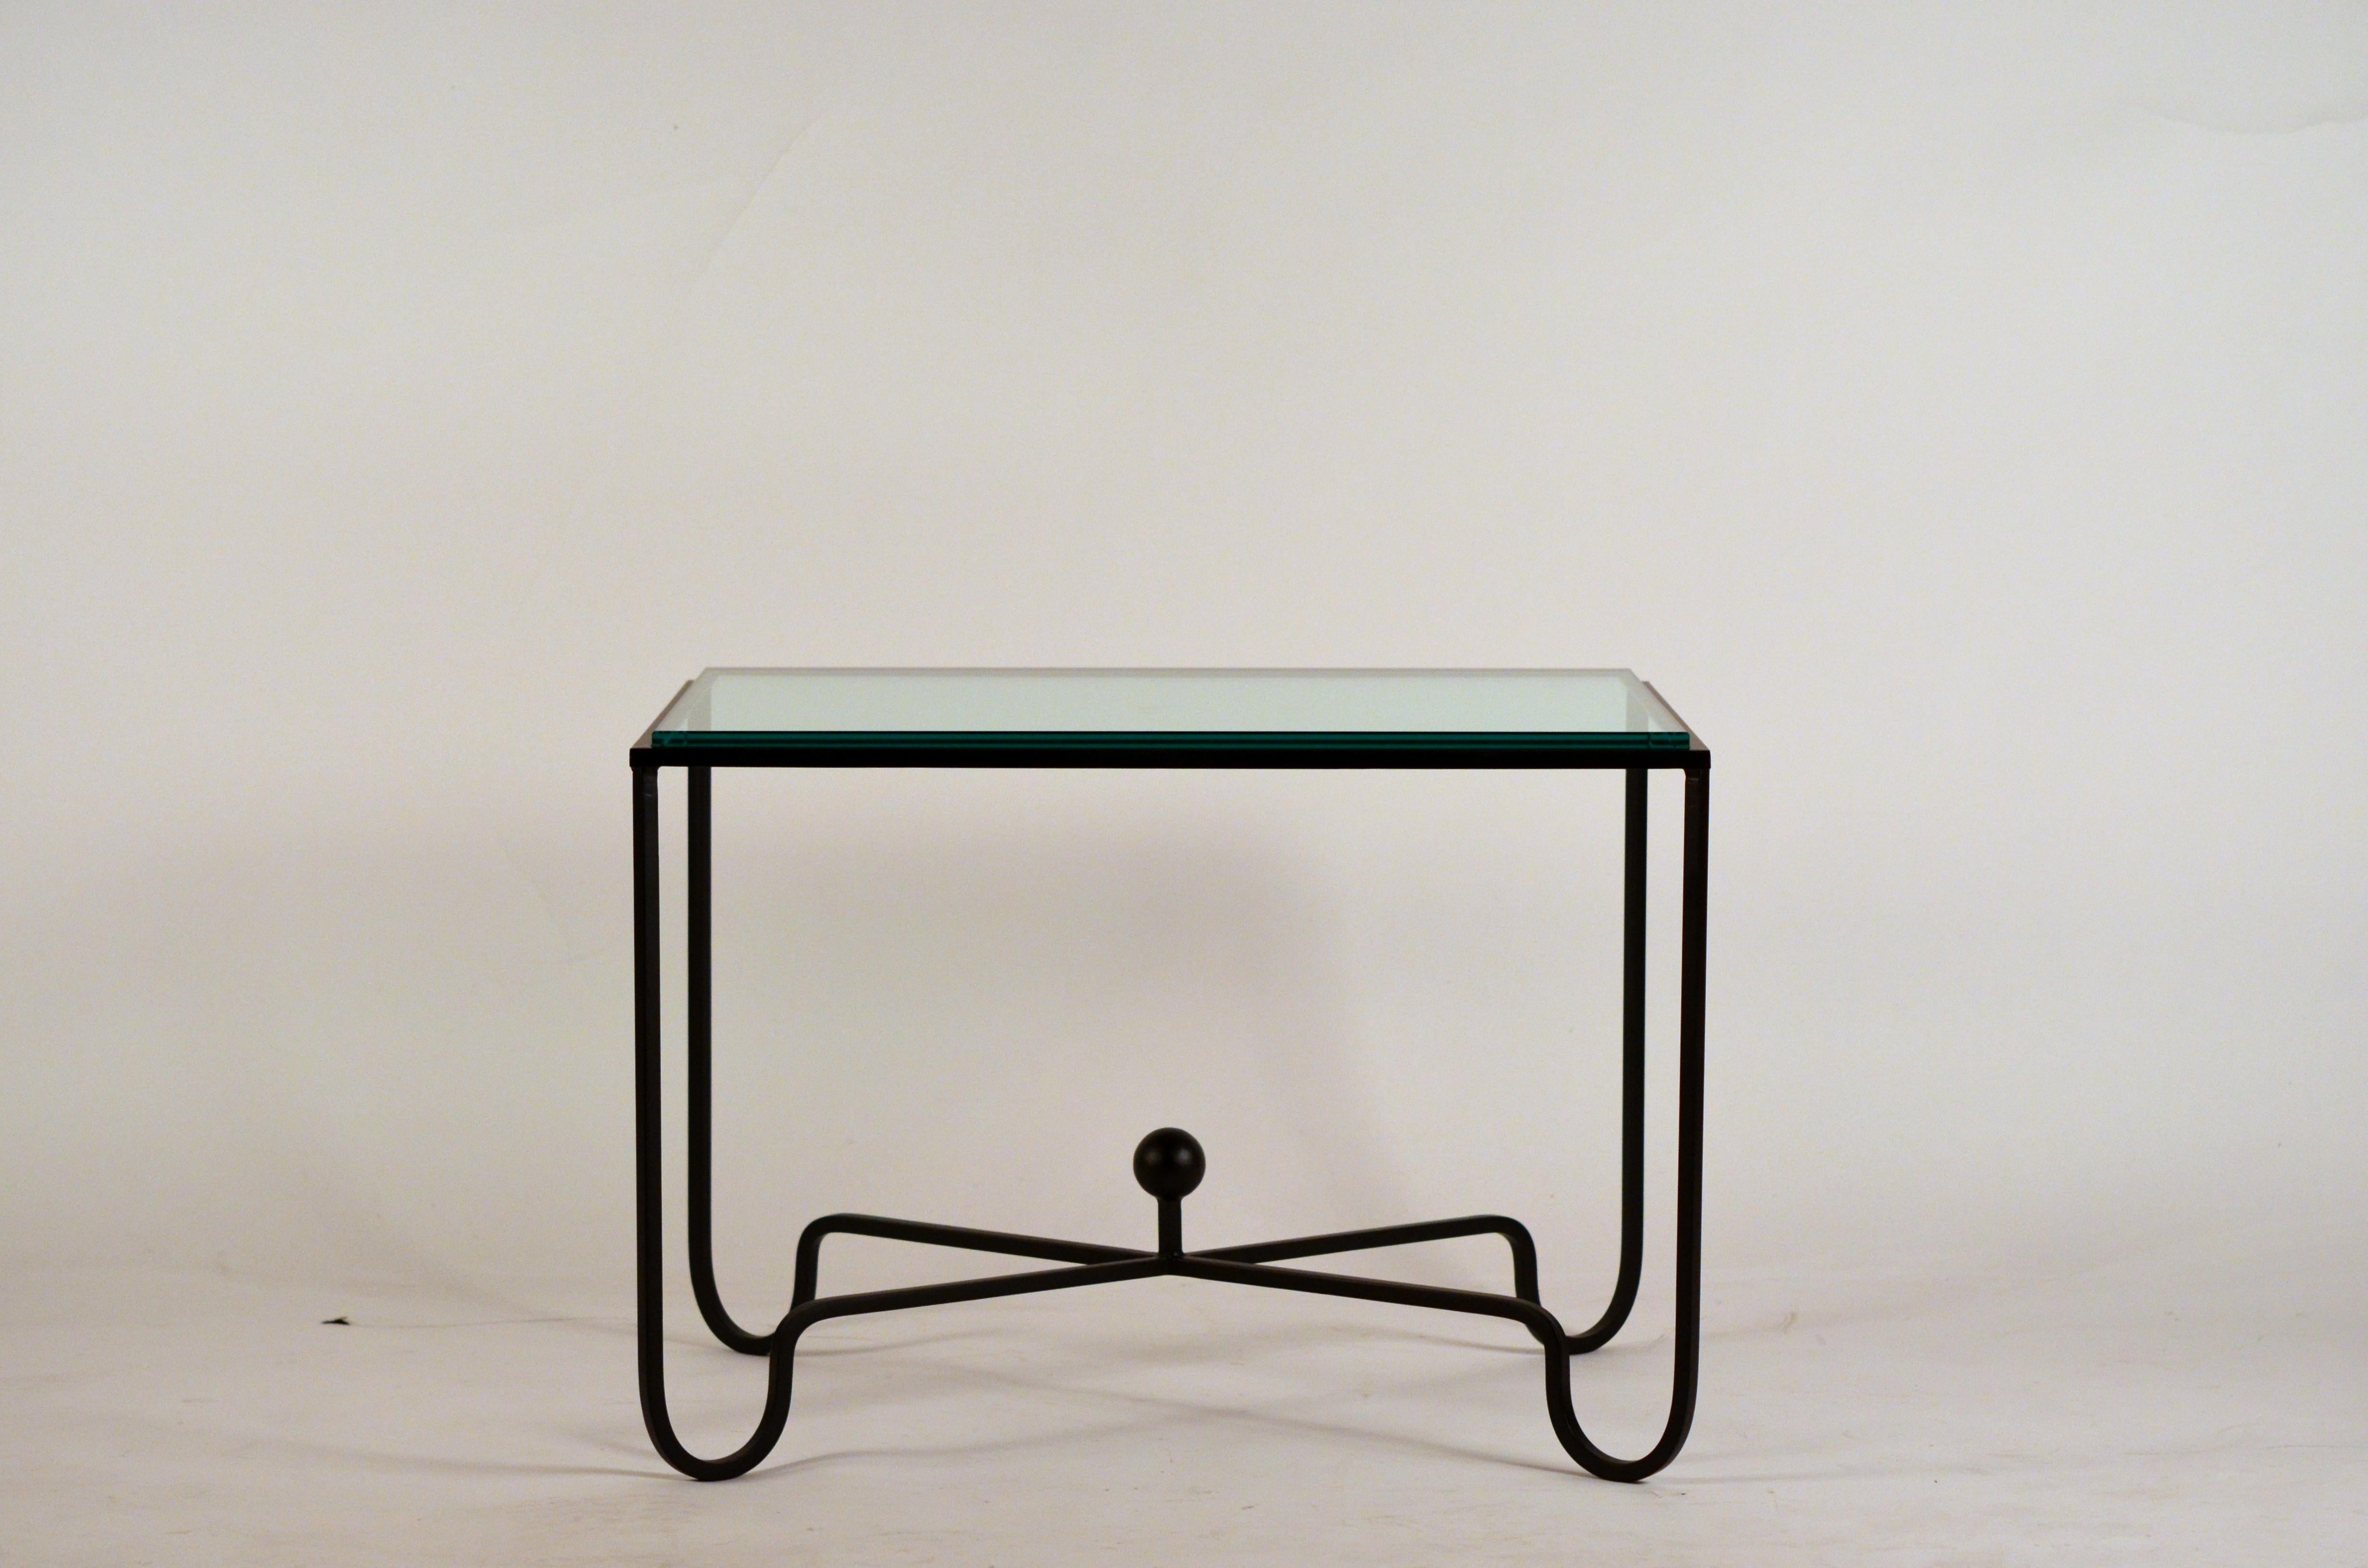 Chic blackened steel and glass 'Entretoise' side table by Design Frères,

Also great as a small coffee table.